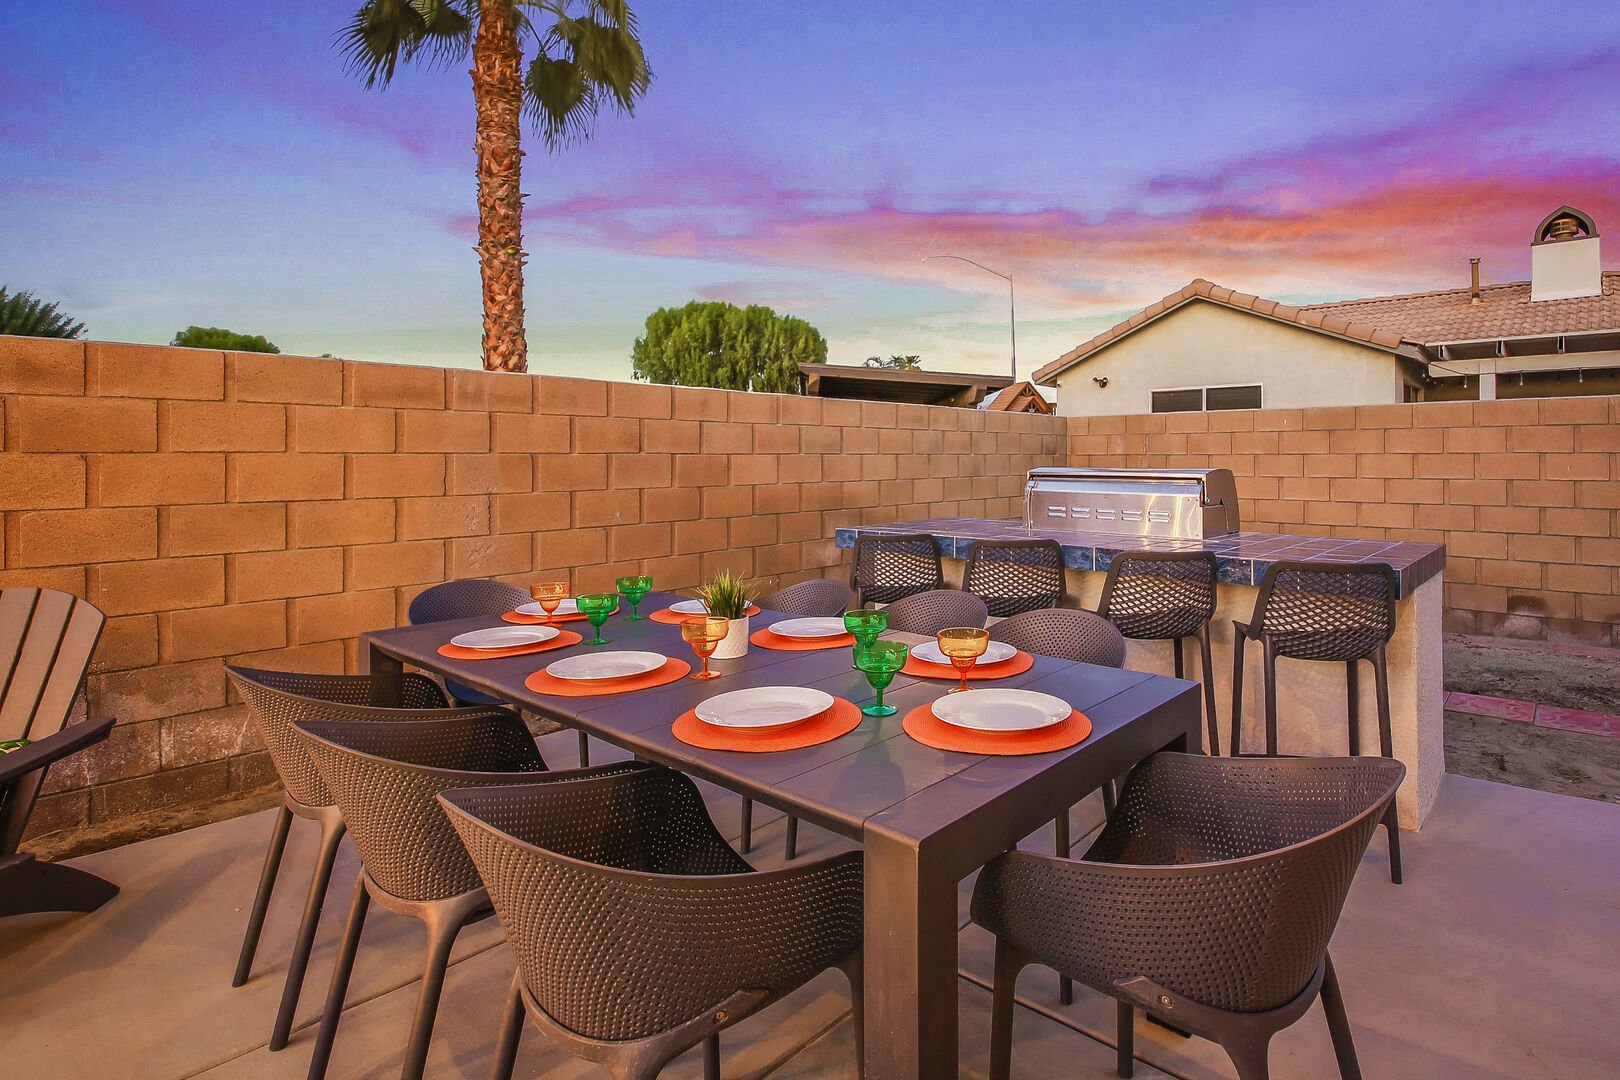 Seating for eight to ensure you and your guests will enjoy dinner al-fresco.